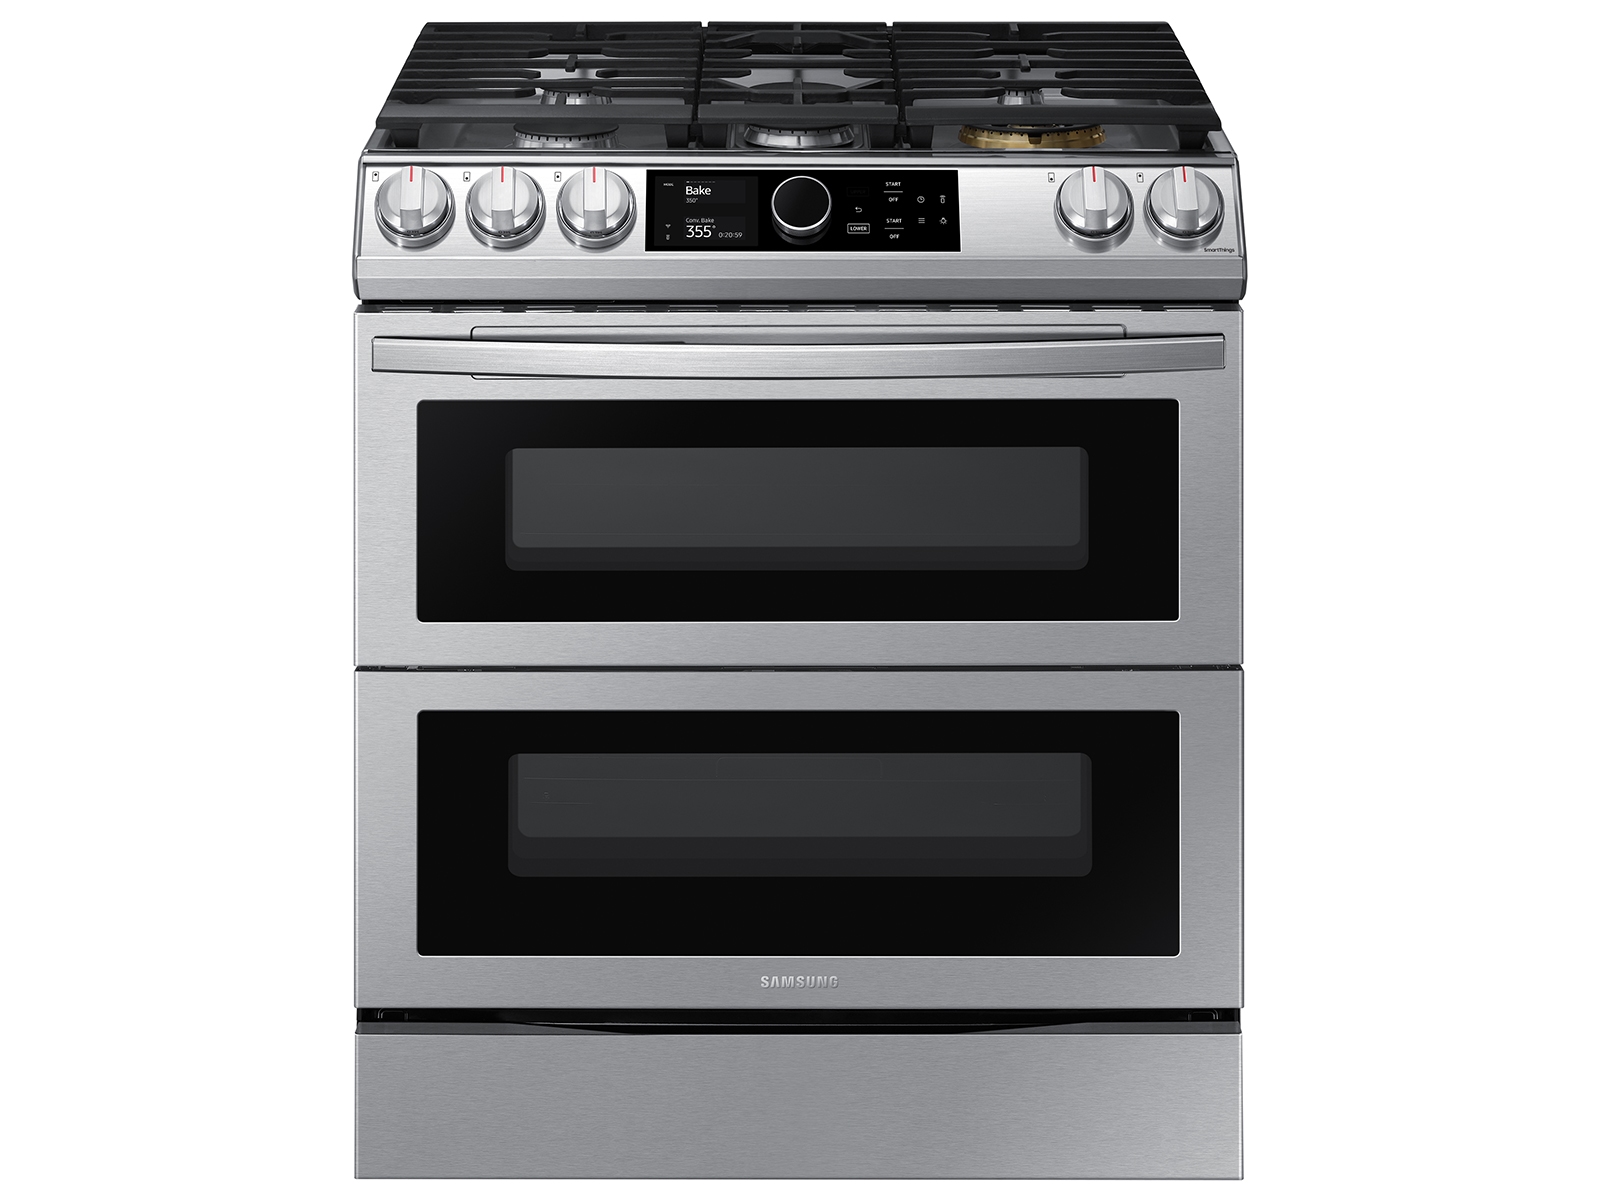 Samsung 6.3 cu. ft. Flex Duo™ Front Control Slide-in Dual Fuel Range with Smart Dial, Air Fry, and Wi-Fi in Silver(NY63T8751SS/AA)